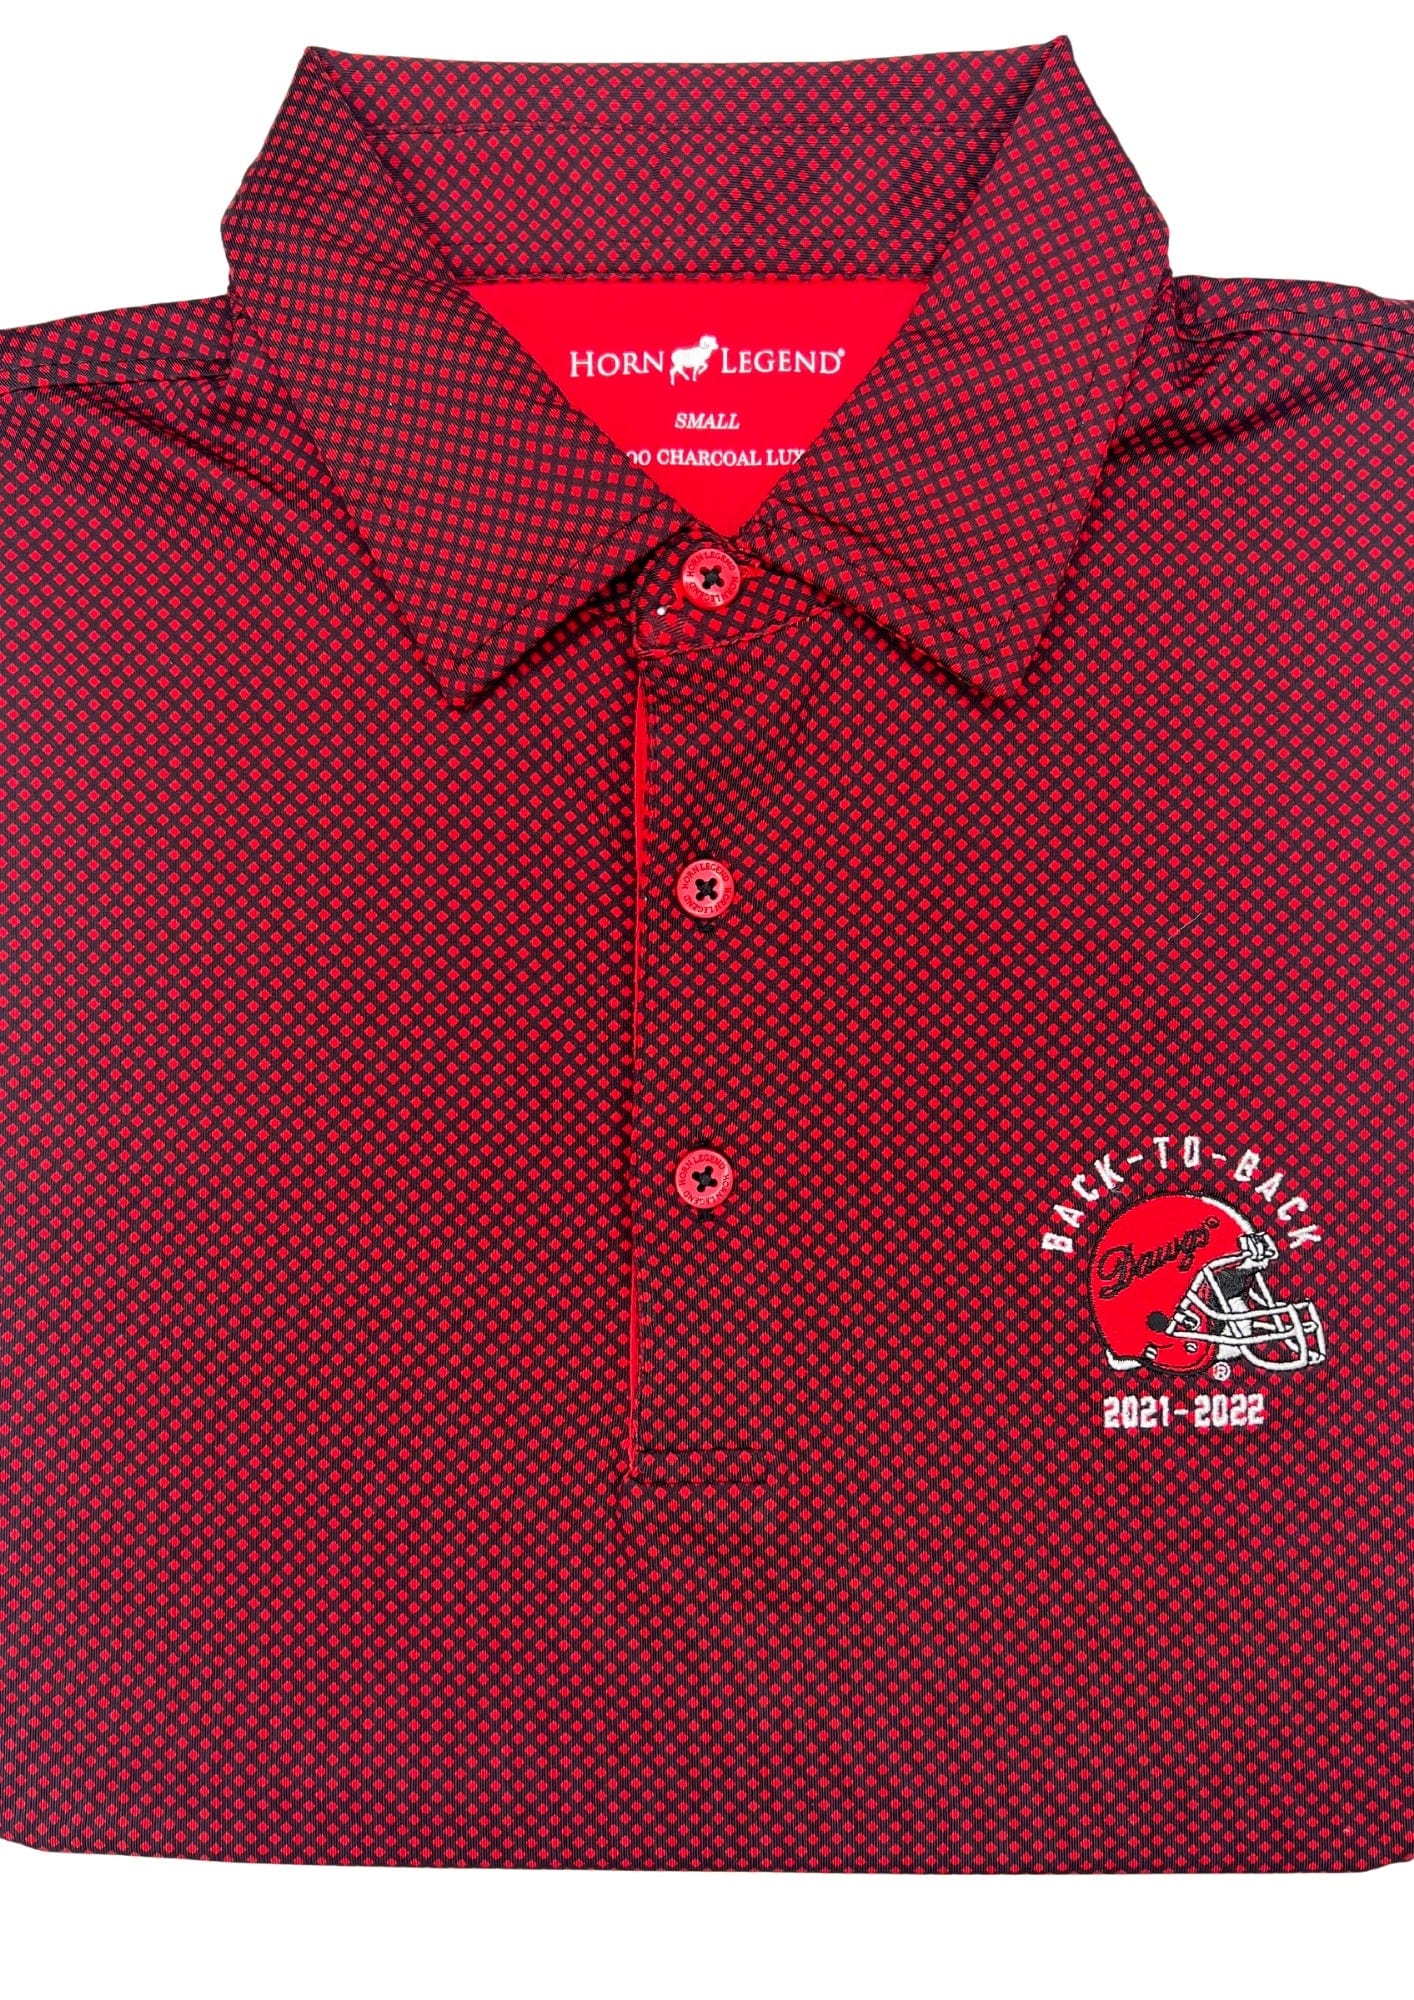 HORN LEGEND GAMEDAY - UNIVERSITY OF GEORGIA - BACK-TO-BACK - POLO BLACK/RED / S DAWGS BACK-TO-BACK CROSS HATCH POLO